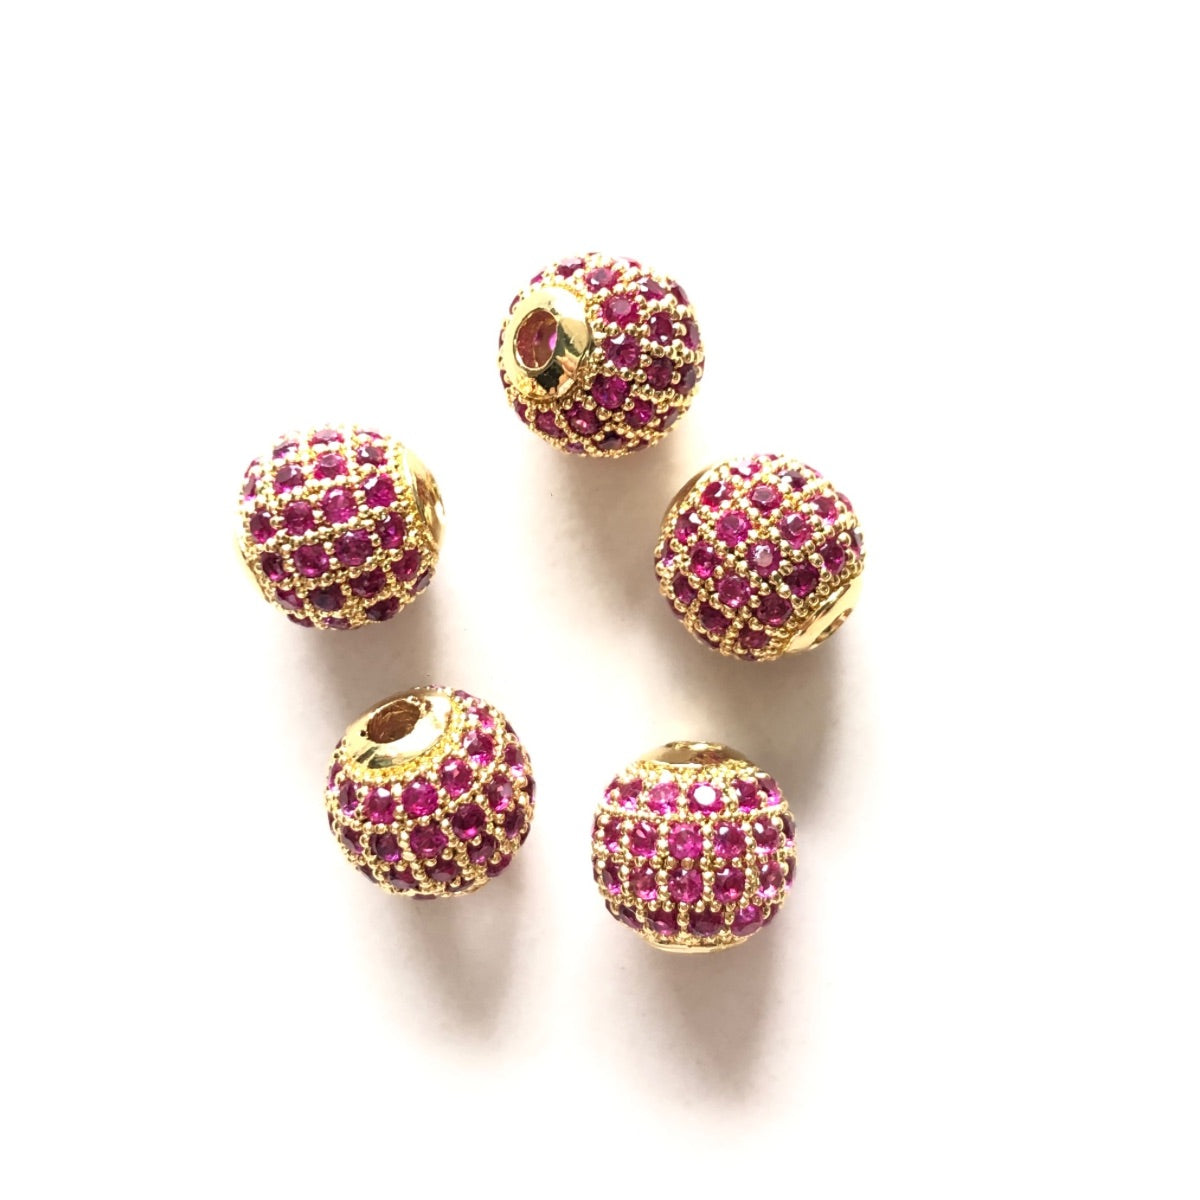 10pcs/lot 6mm, 8mm Colorful CZ Paved Ball Spacers Gold Fuchsia CZ Paved Spacers 6mm Beads 8mm Beads Ball Beads Colorful Zirconia New Spacers Arrivals Charms Beads Beyond